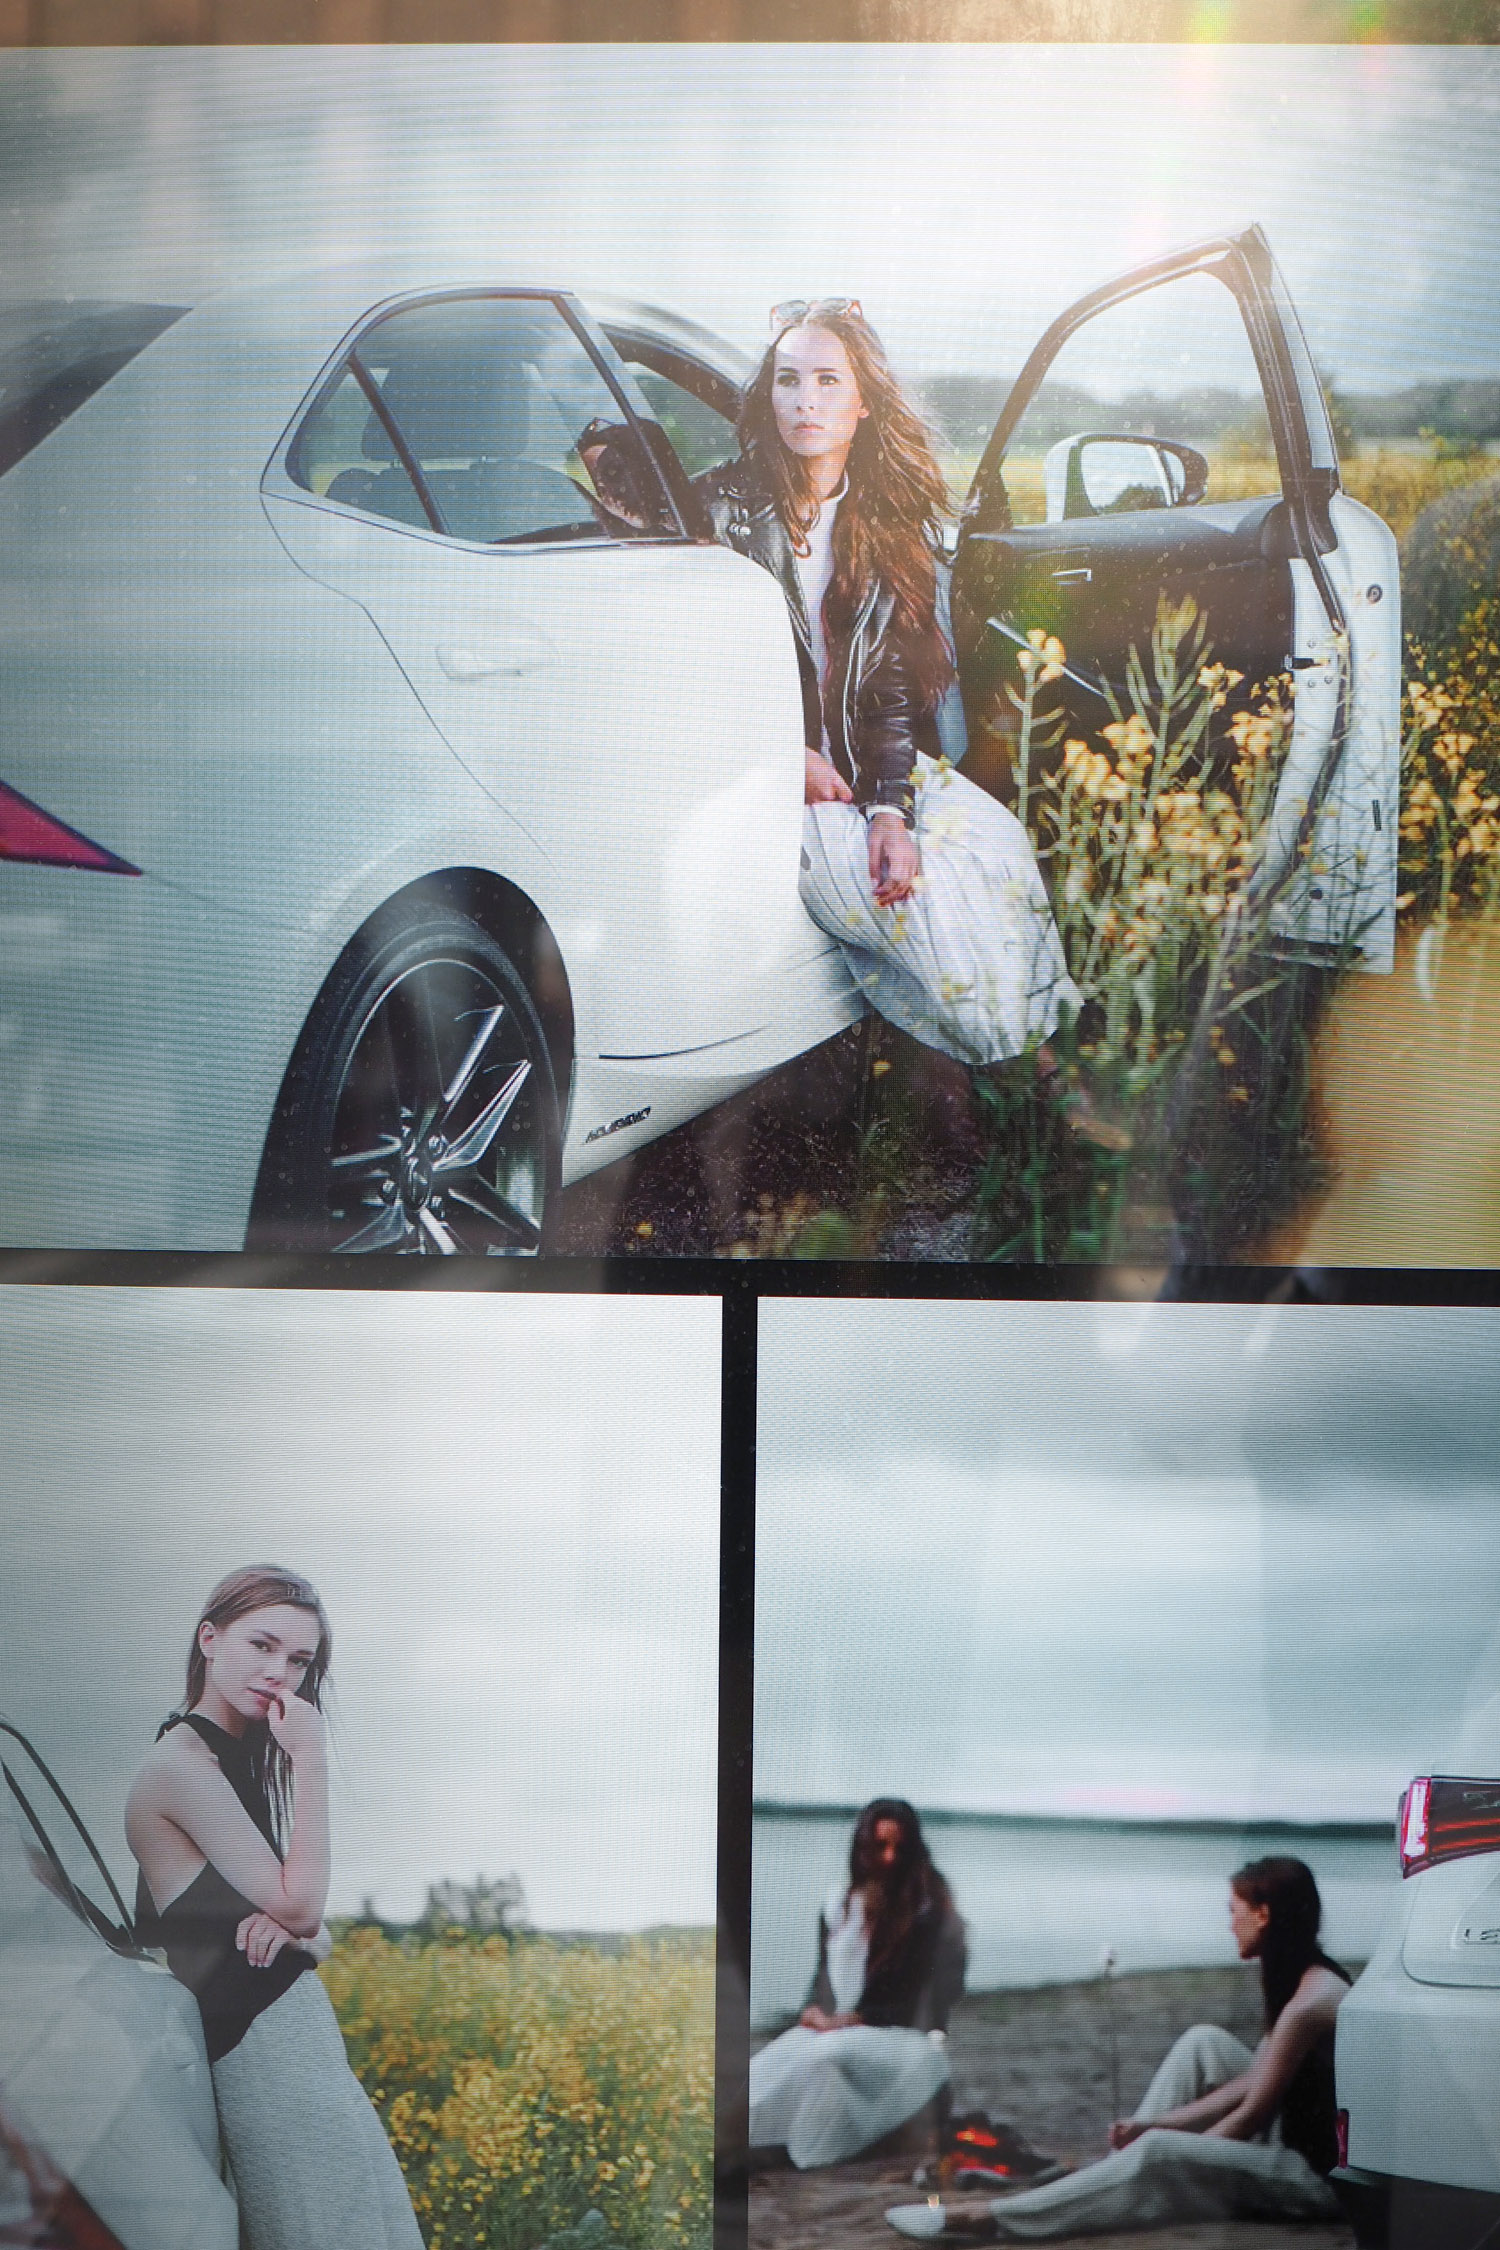 In collaboration with Lexus - Lexus Young Creatives #lexusyoungcretives photography contest at Helsinki Design Week in Helsinki, Finland - read more on the blog: //www.idealista.fi/charandthecity/2016/09/14/lexus-young-creatives